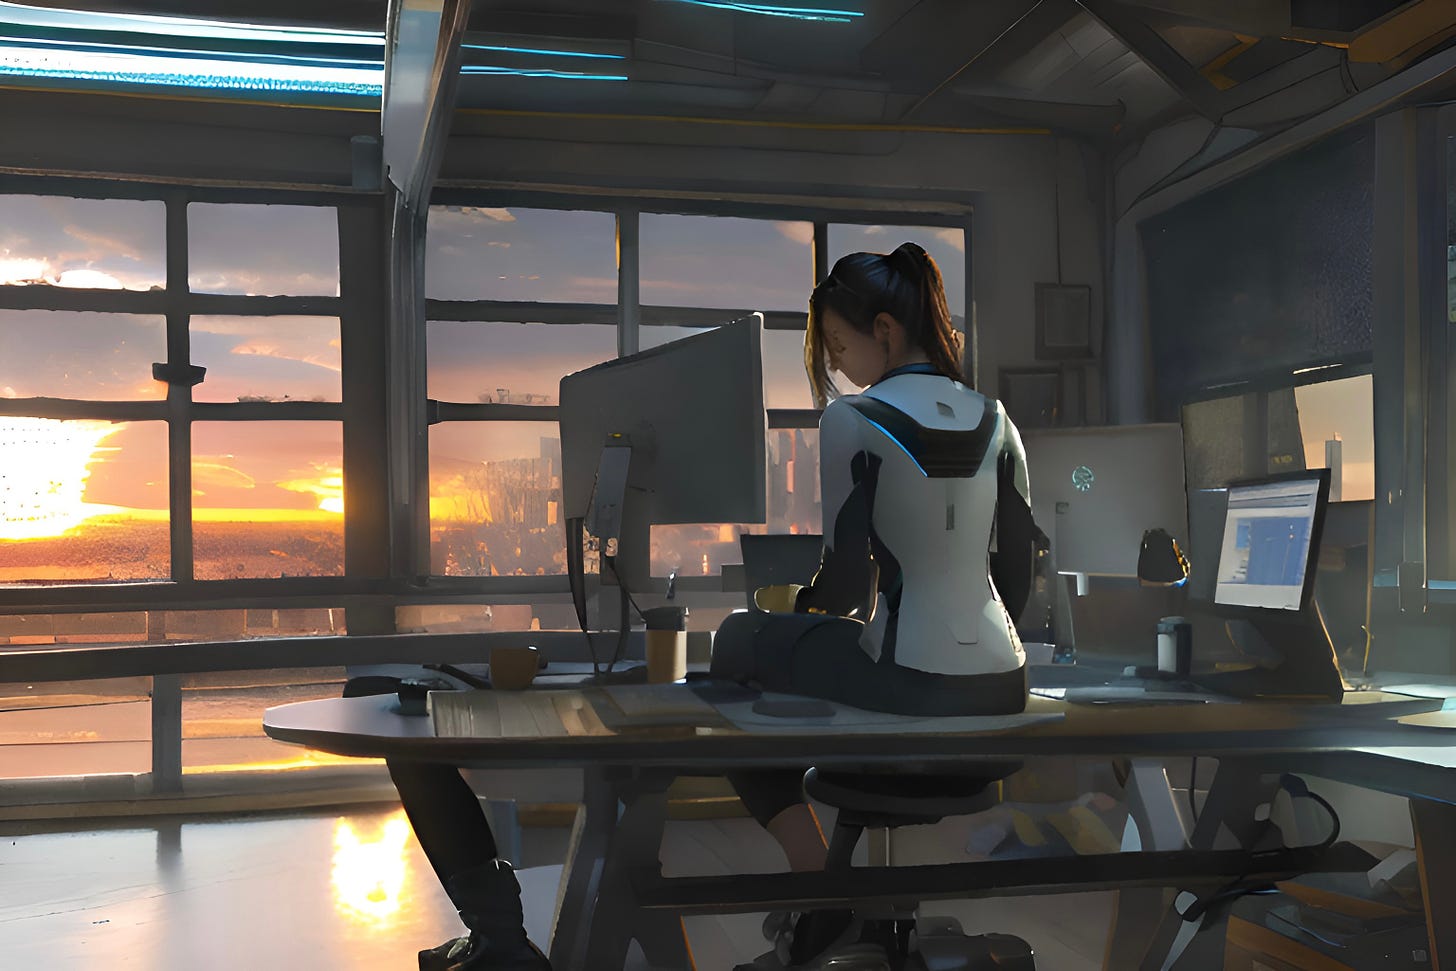 A young woman sits on a desk facing large windows that look out over a city